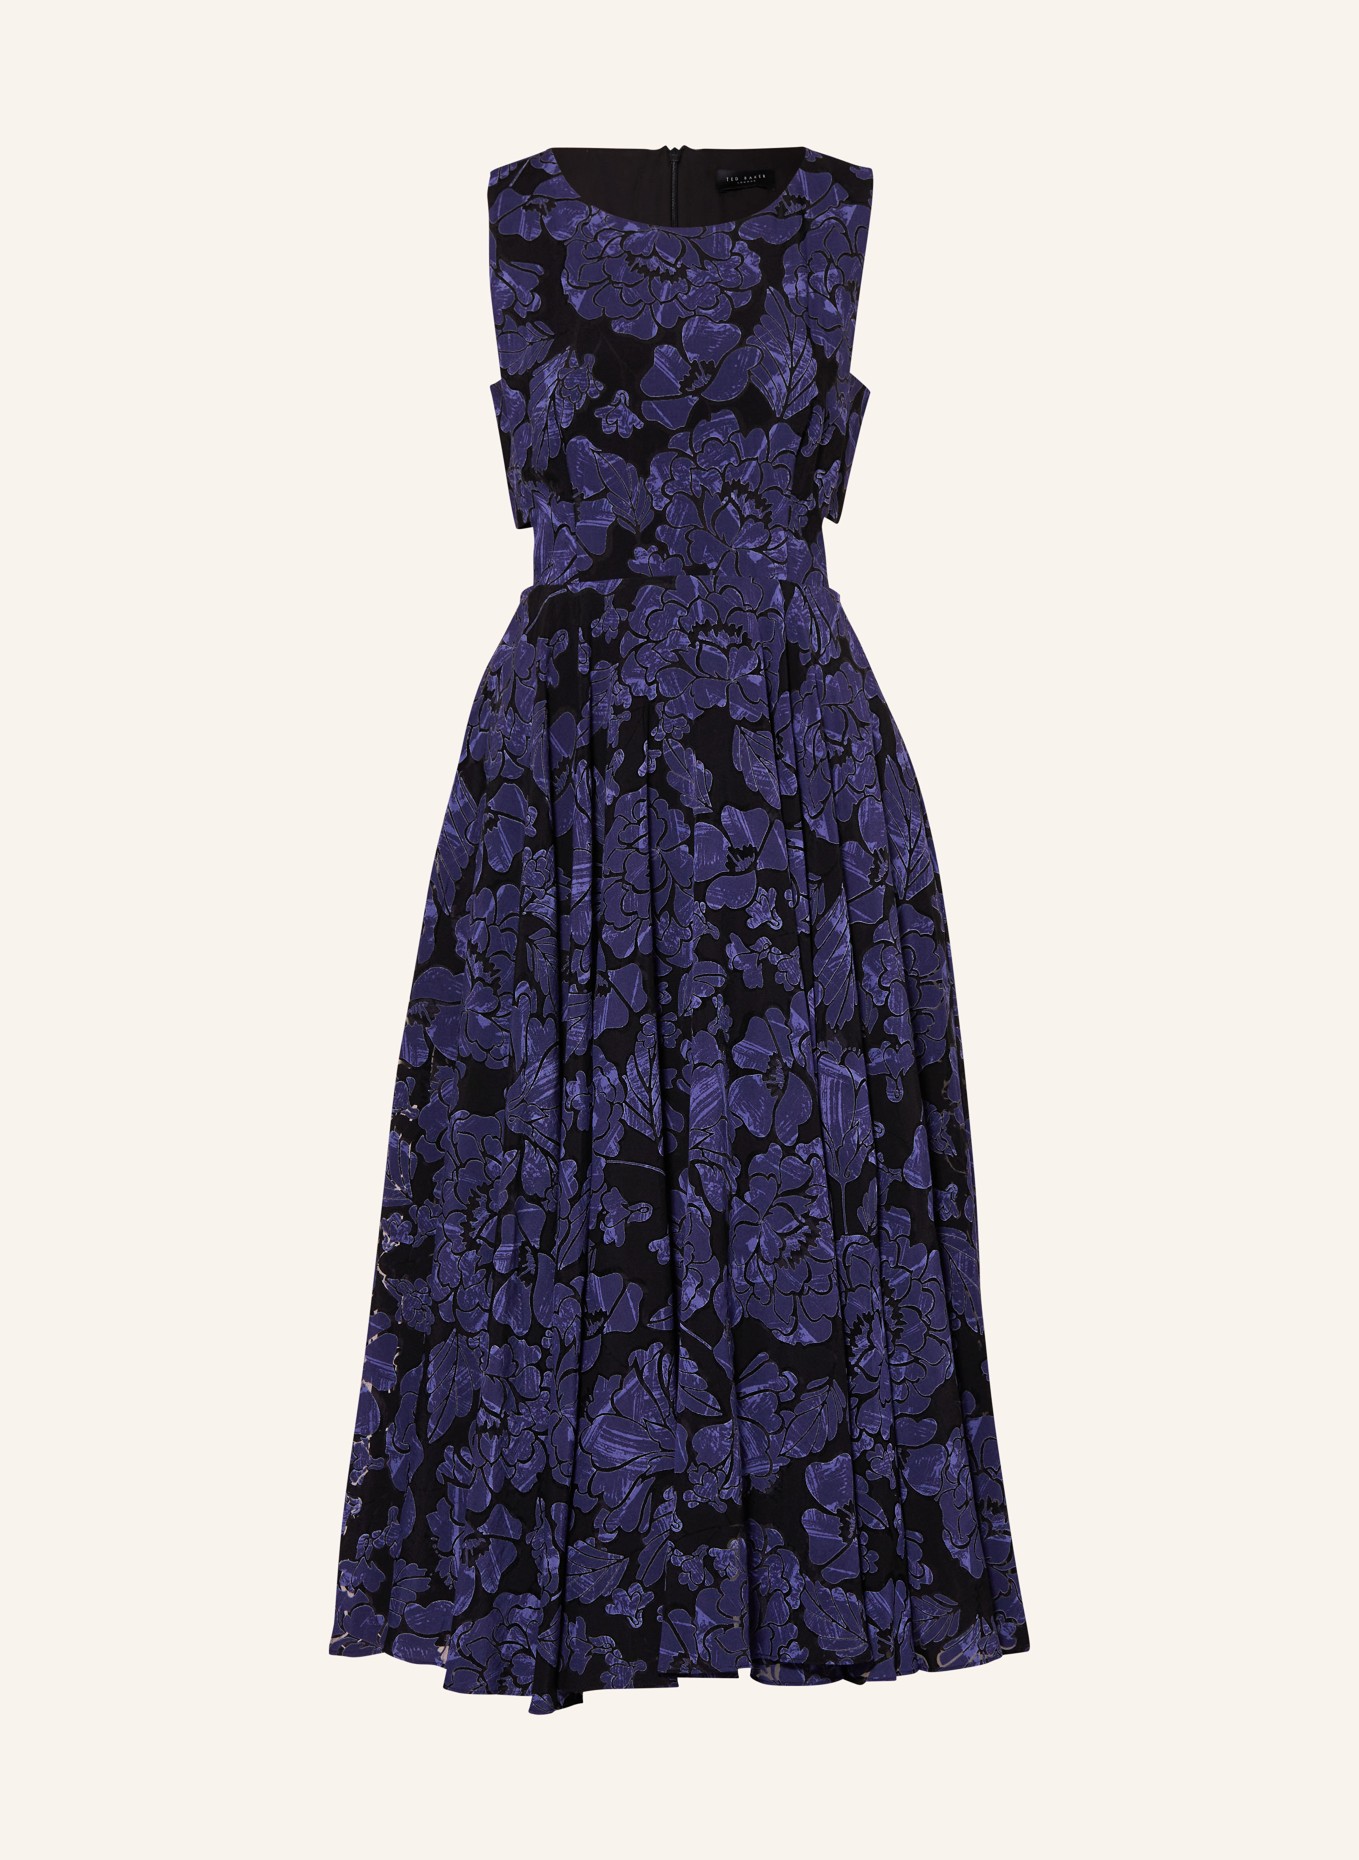 TED BAKER Dress OCCHITO with cut-out, Color: DARK BLUE/ BLACK (Image 1)